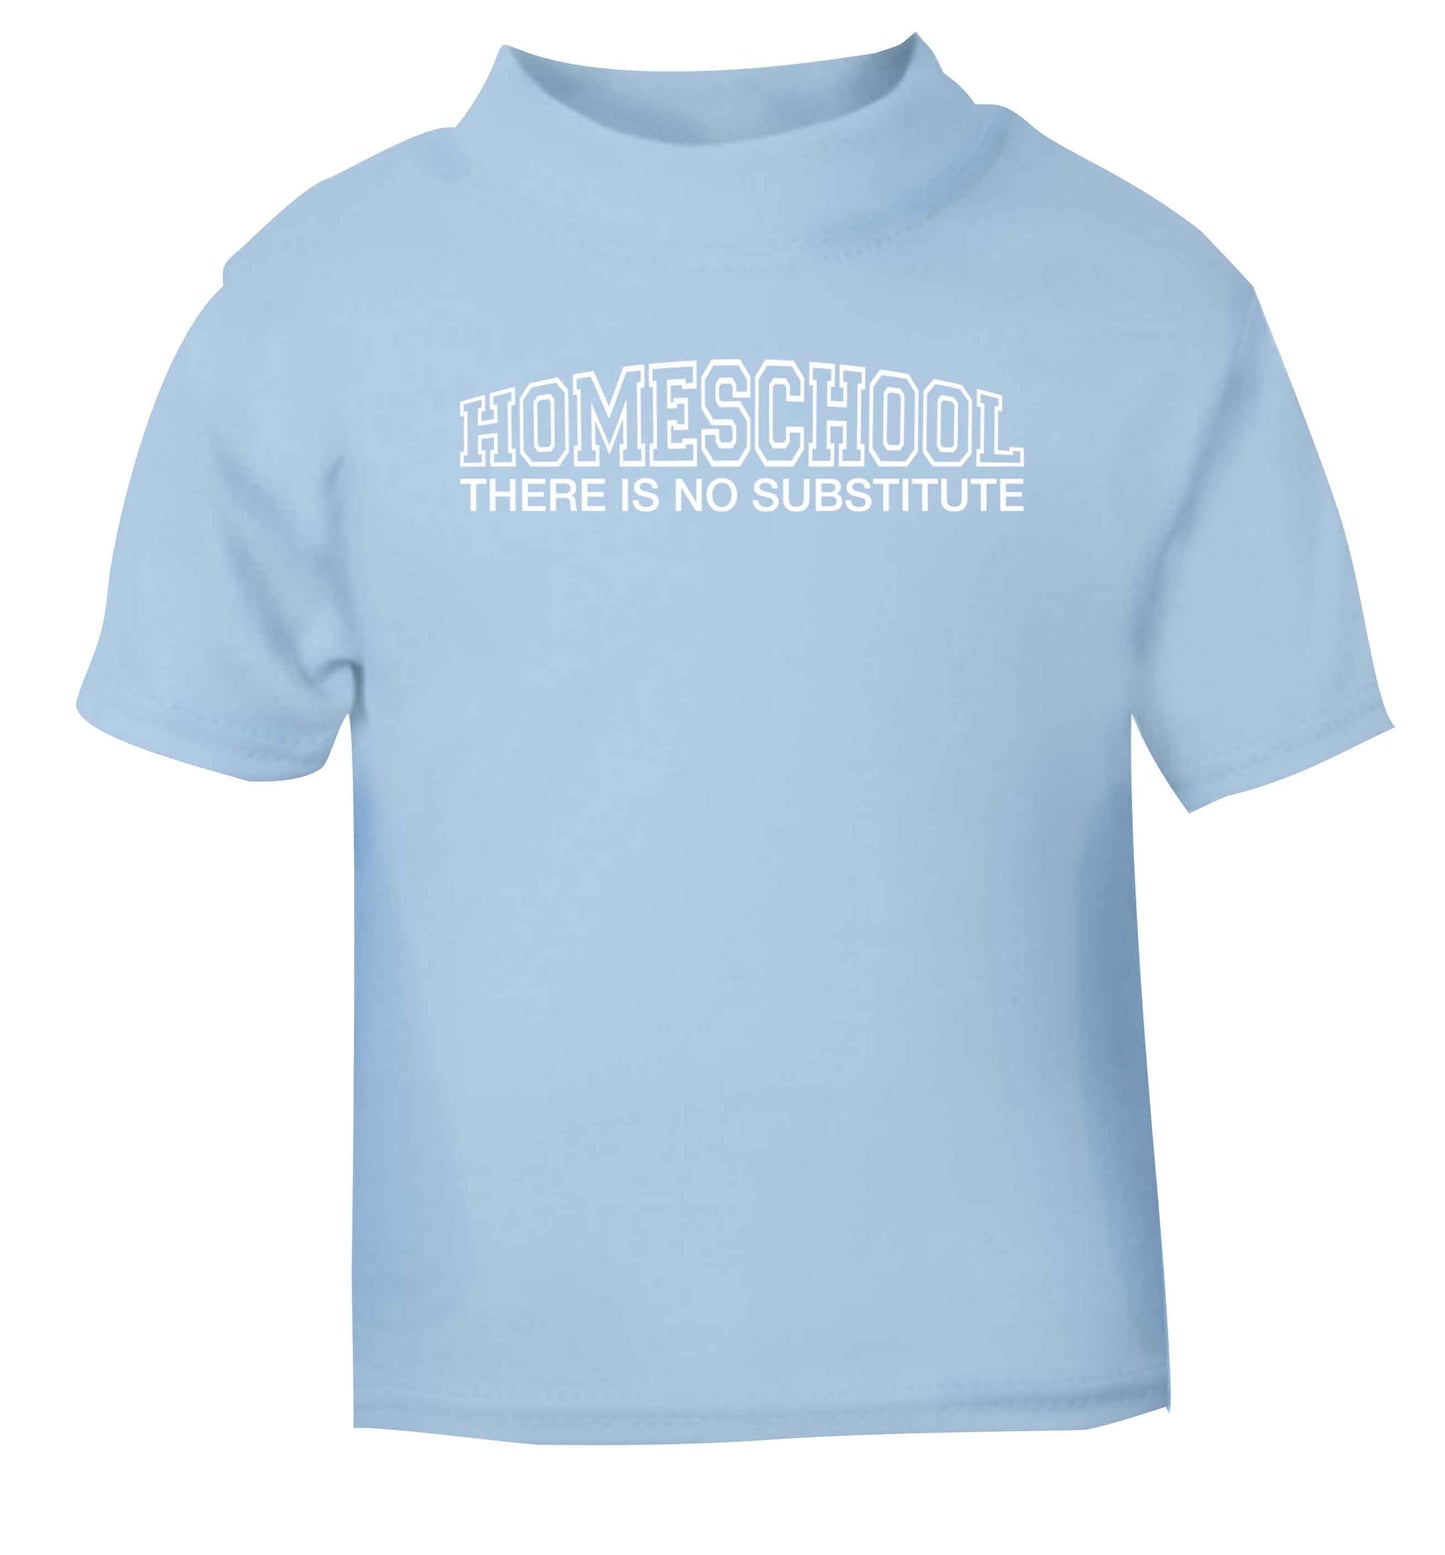 Homeschool there is not substitute light blue Baby Toddler Tshirt 2 Years